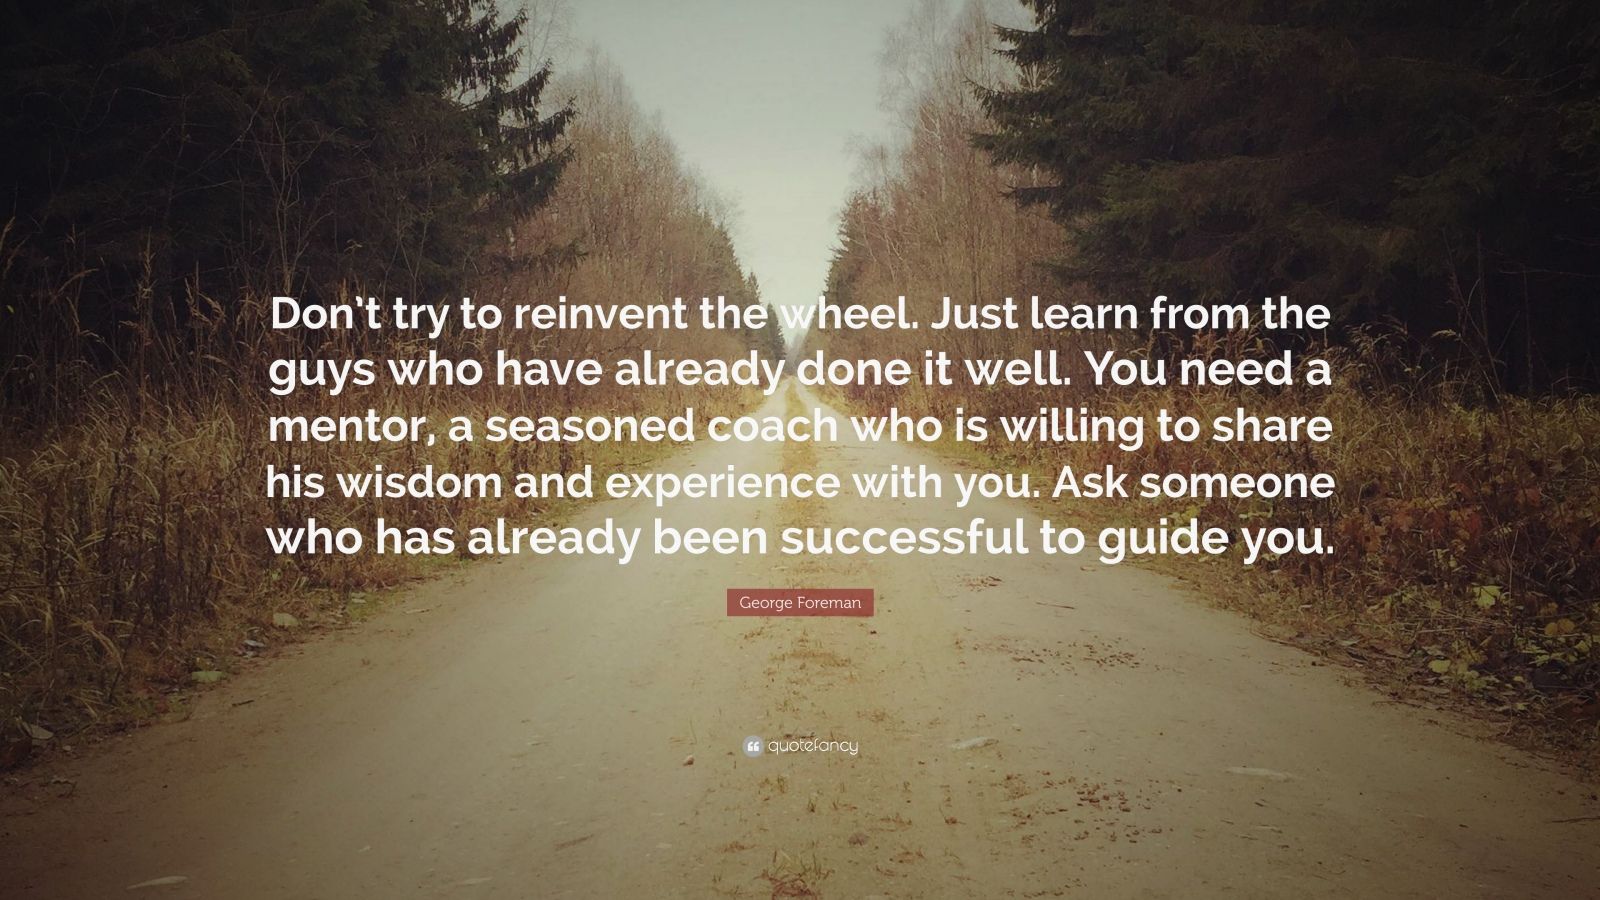 George Foreman Quote: “Don’t try to reinvent the wheel. Just learn from